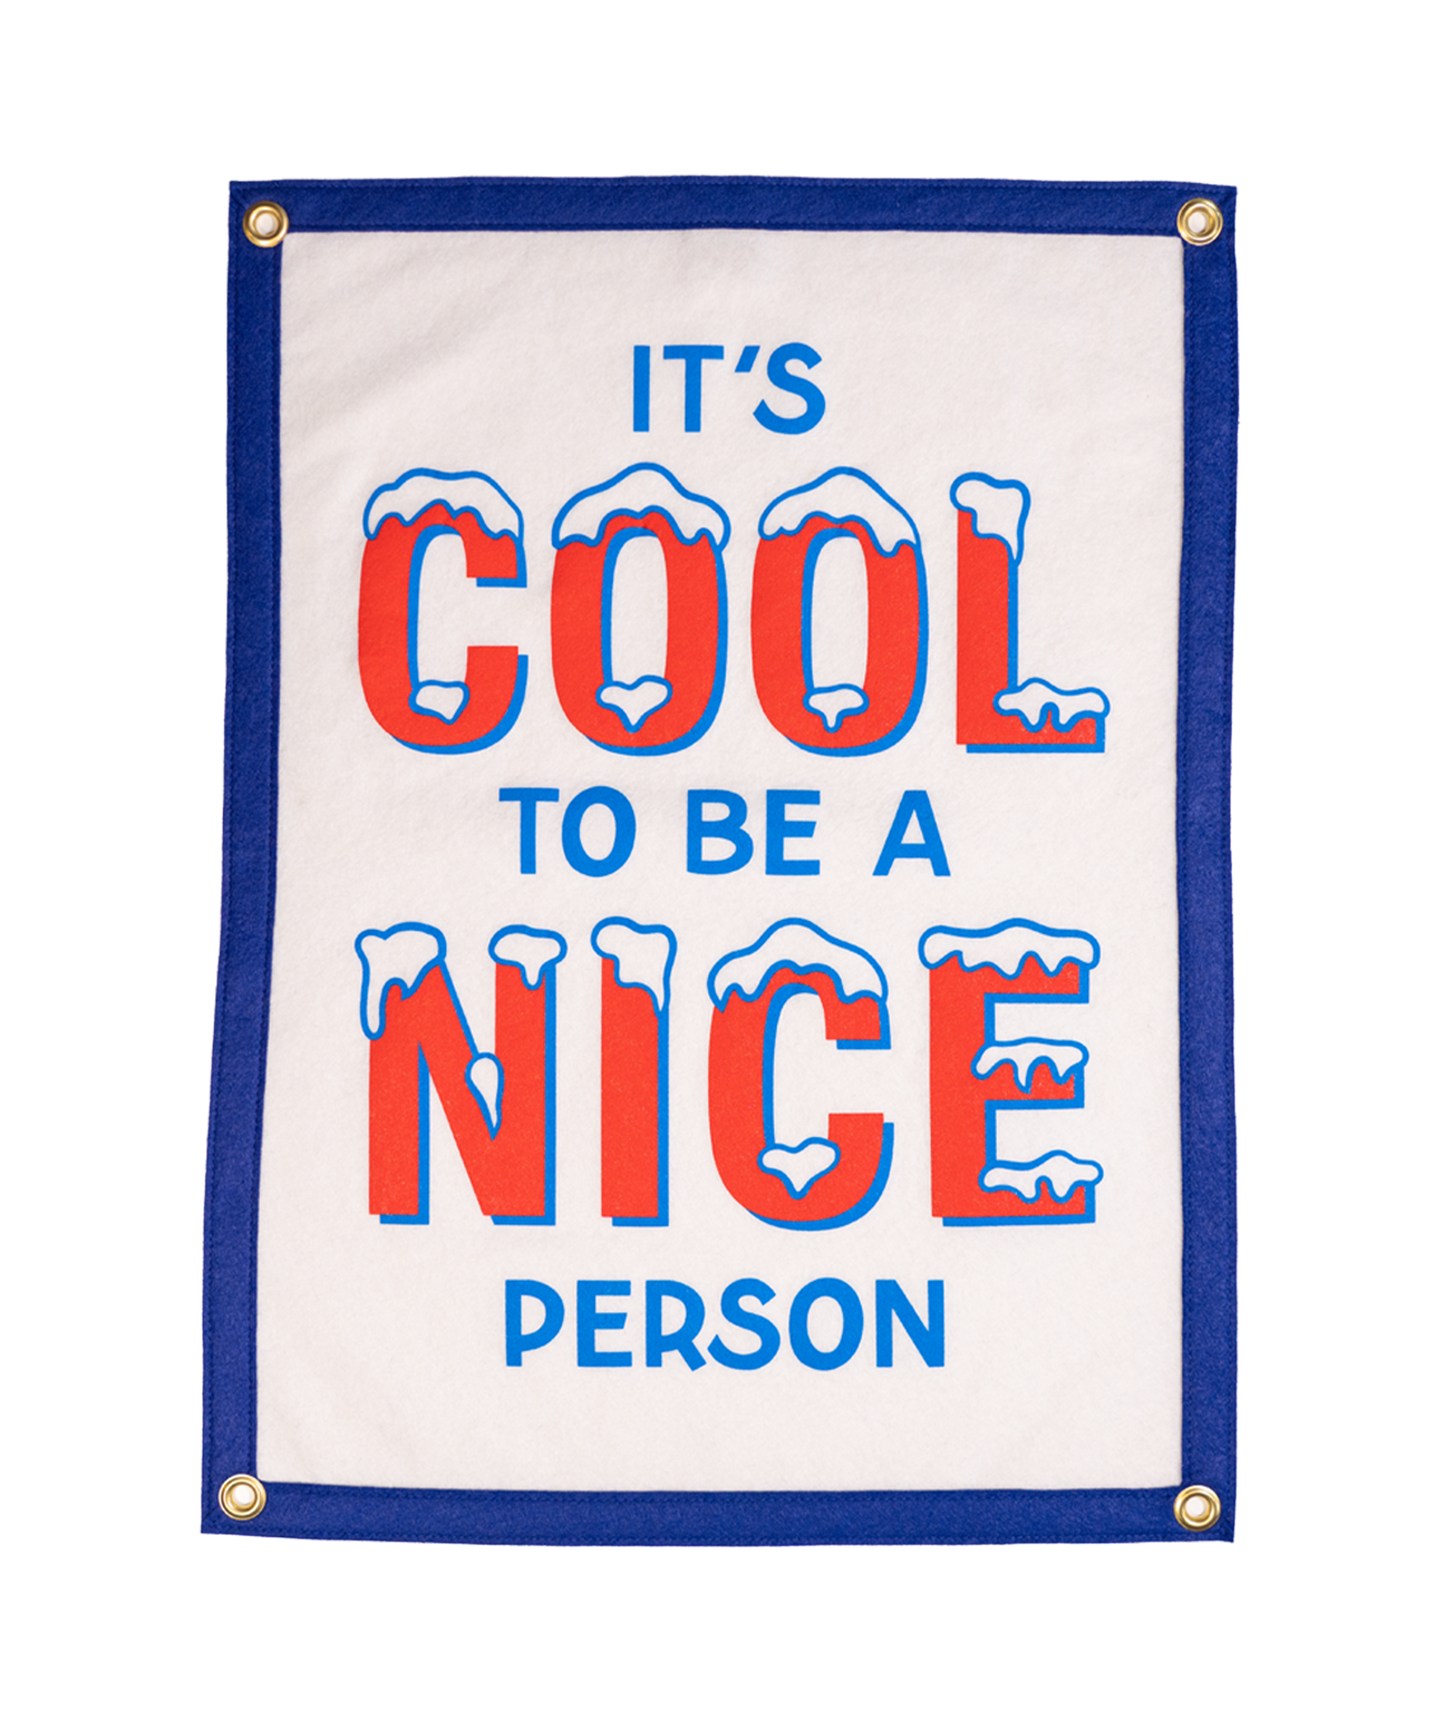 It's Cool To Be A Nice Person Camp Flag • Holy Smokes x Oxford Pennant